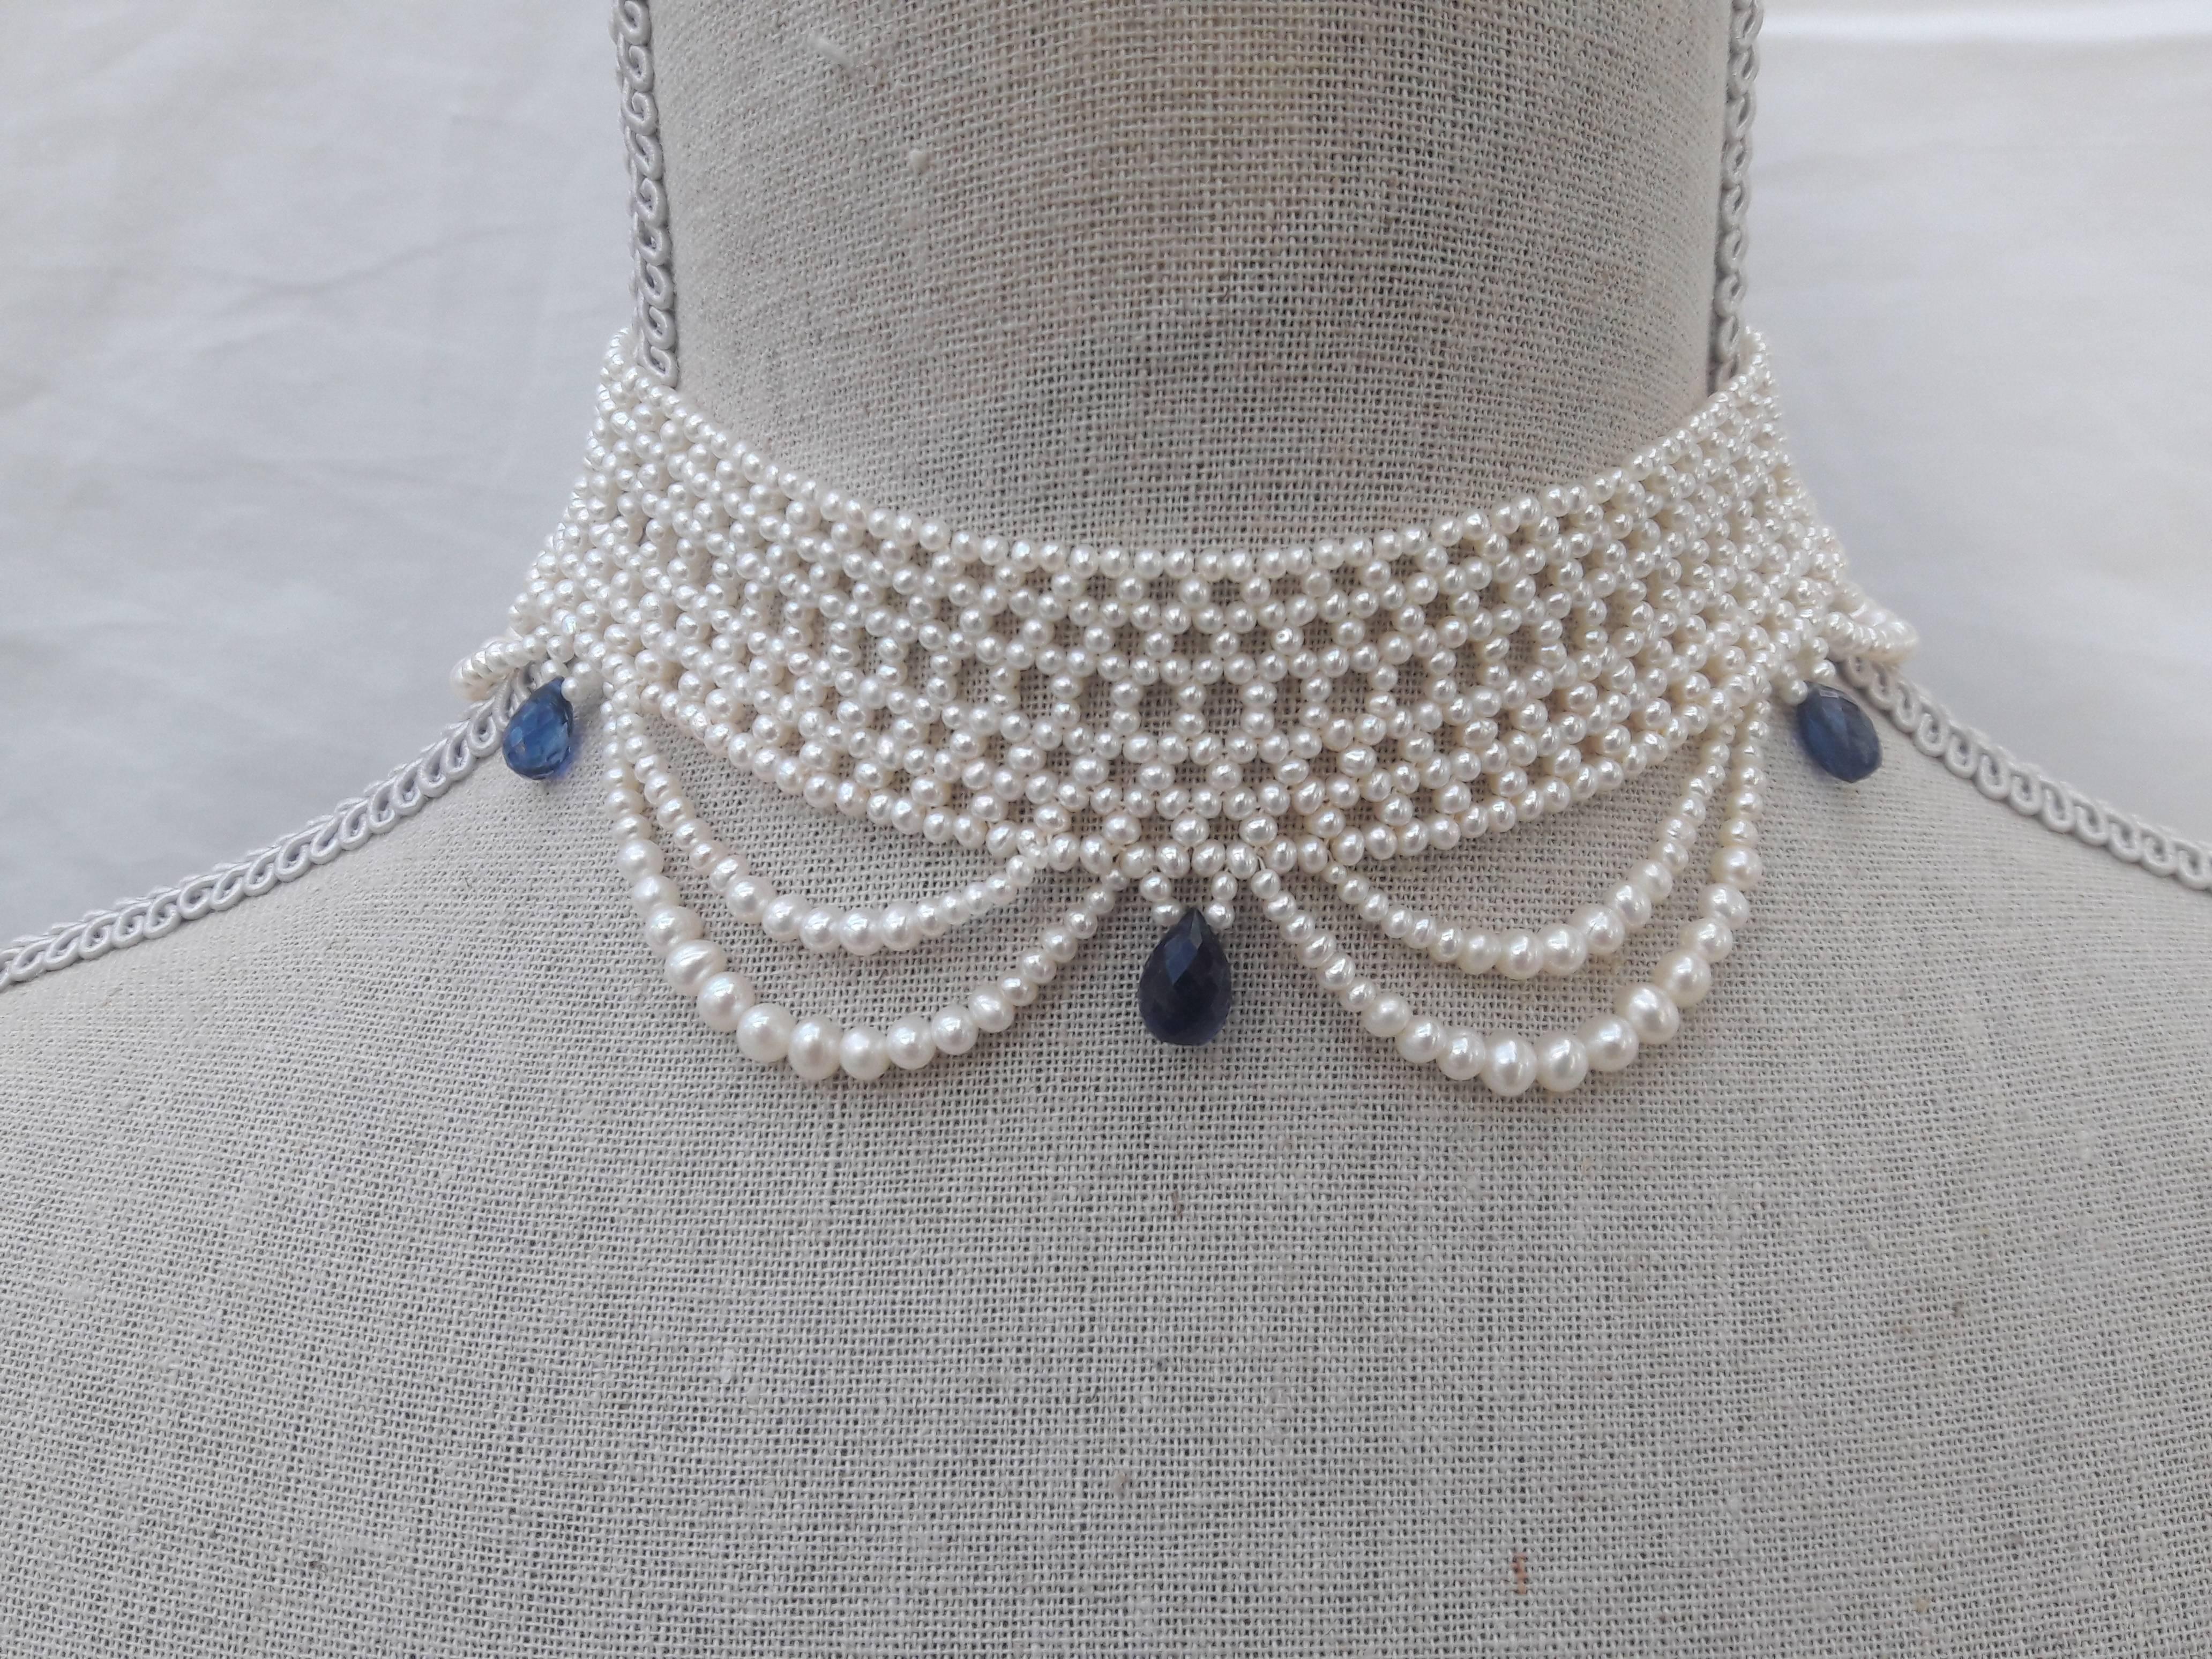 Artist Marina J Woven Pearl Draped Choker Necklace with Kyanite Briolets 